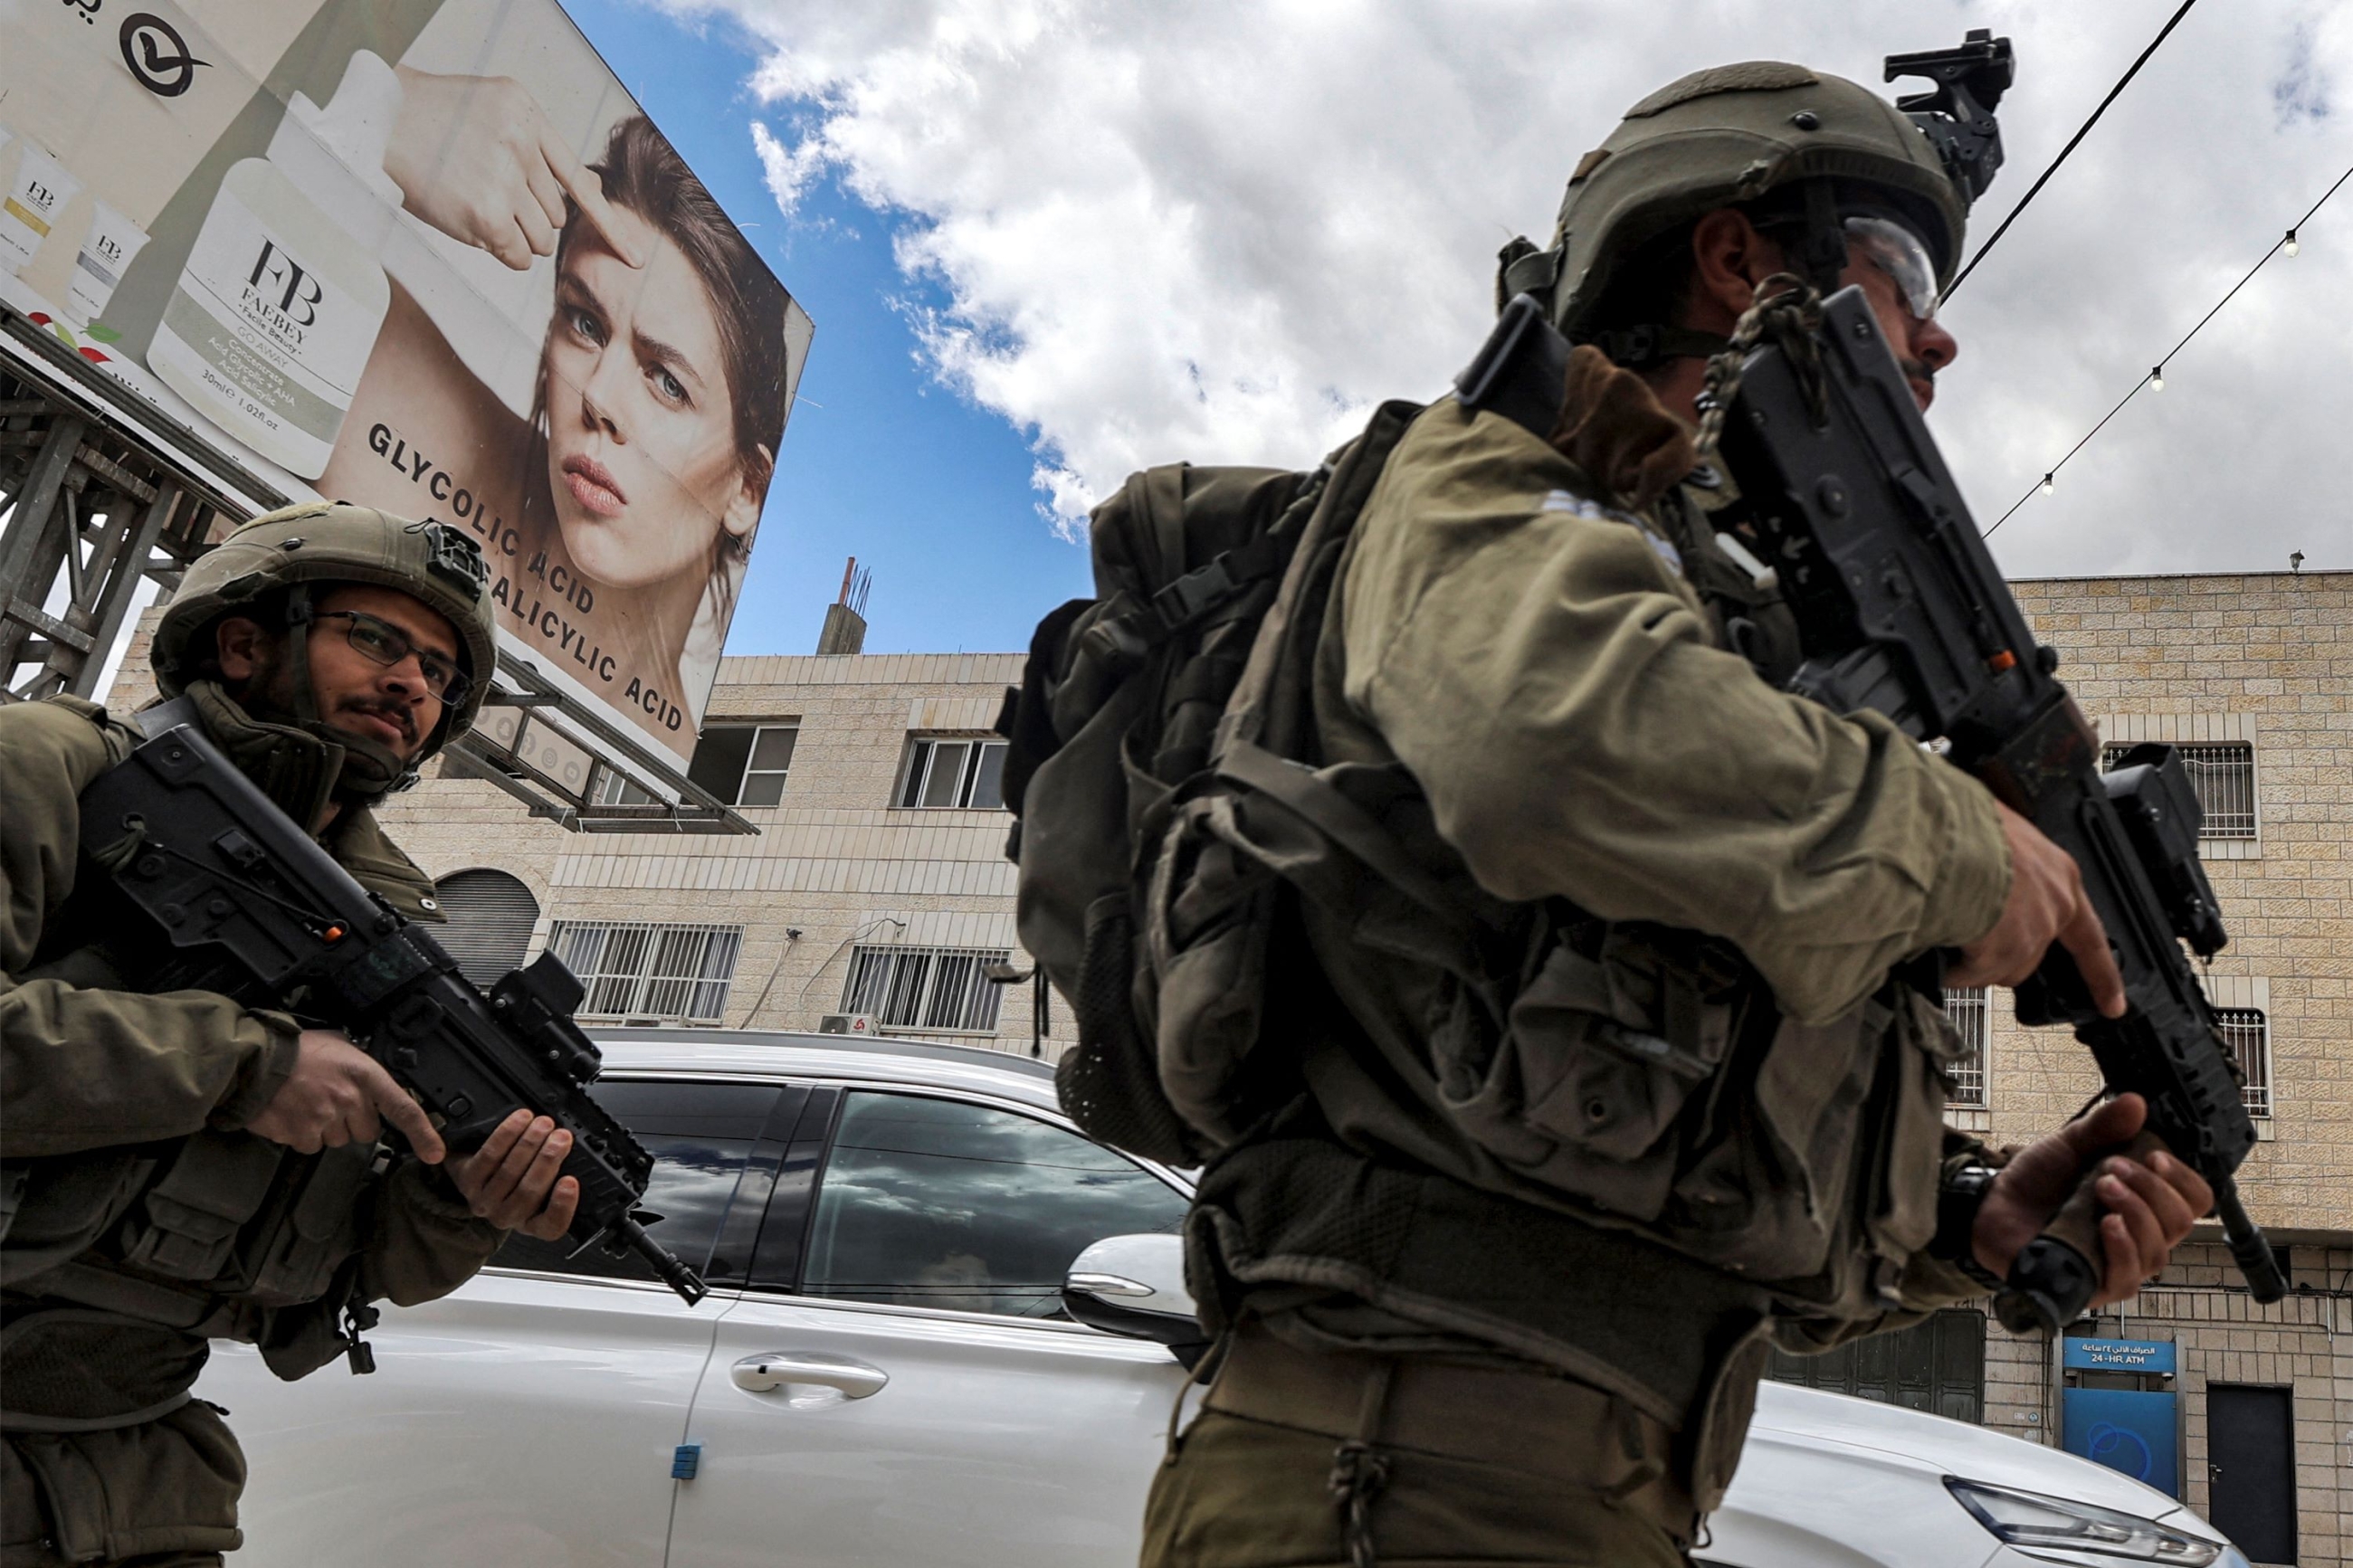 Israeli soldiers stand before Palestinian protesters (not pictured) gathering for a Land Day demonstration in the Palestinian town of Huwara in the occupied West Bank on March 31, 2023 (AFP)